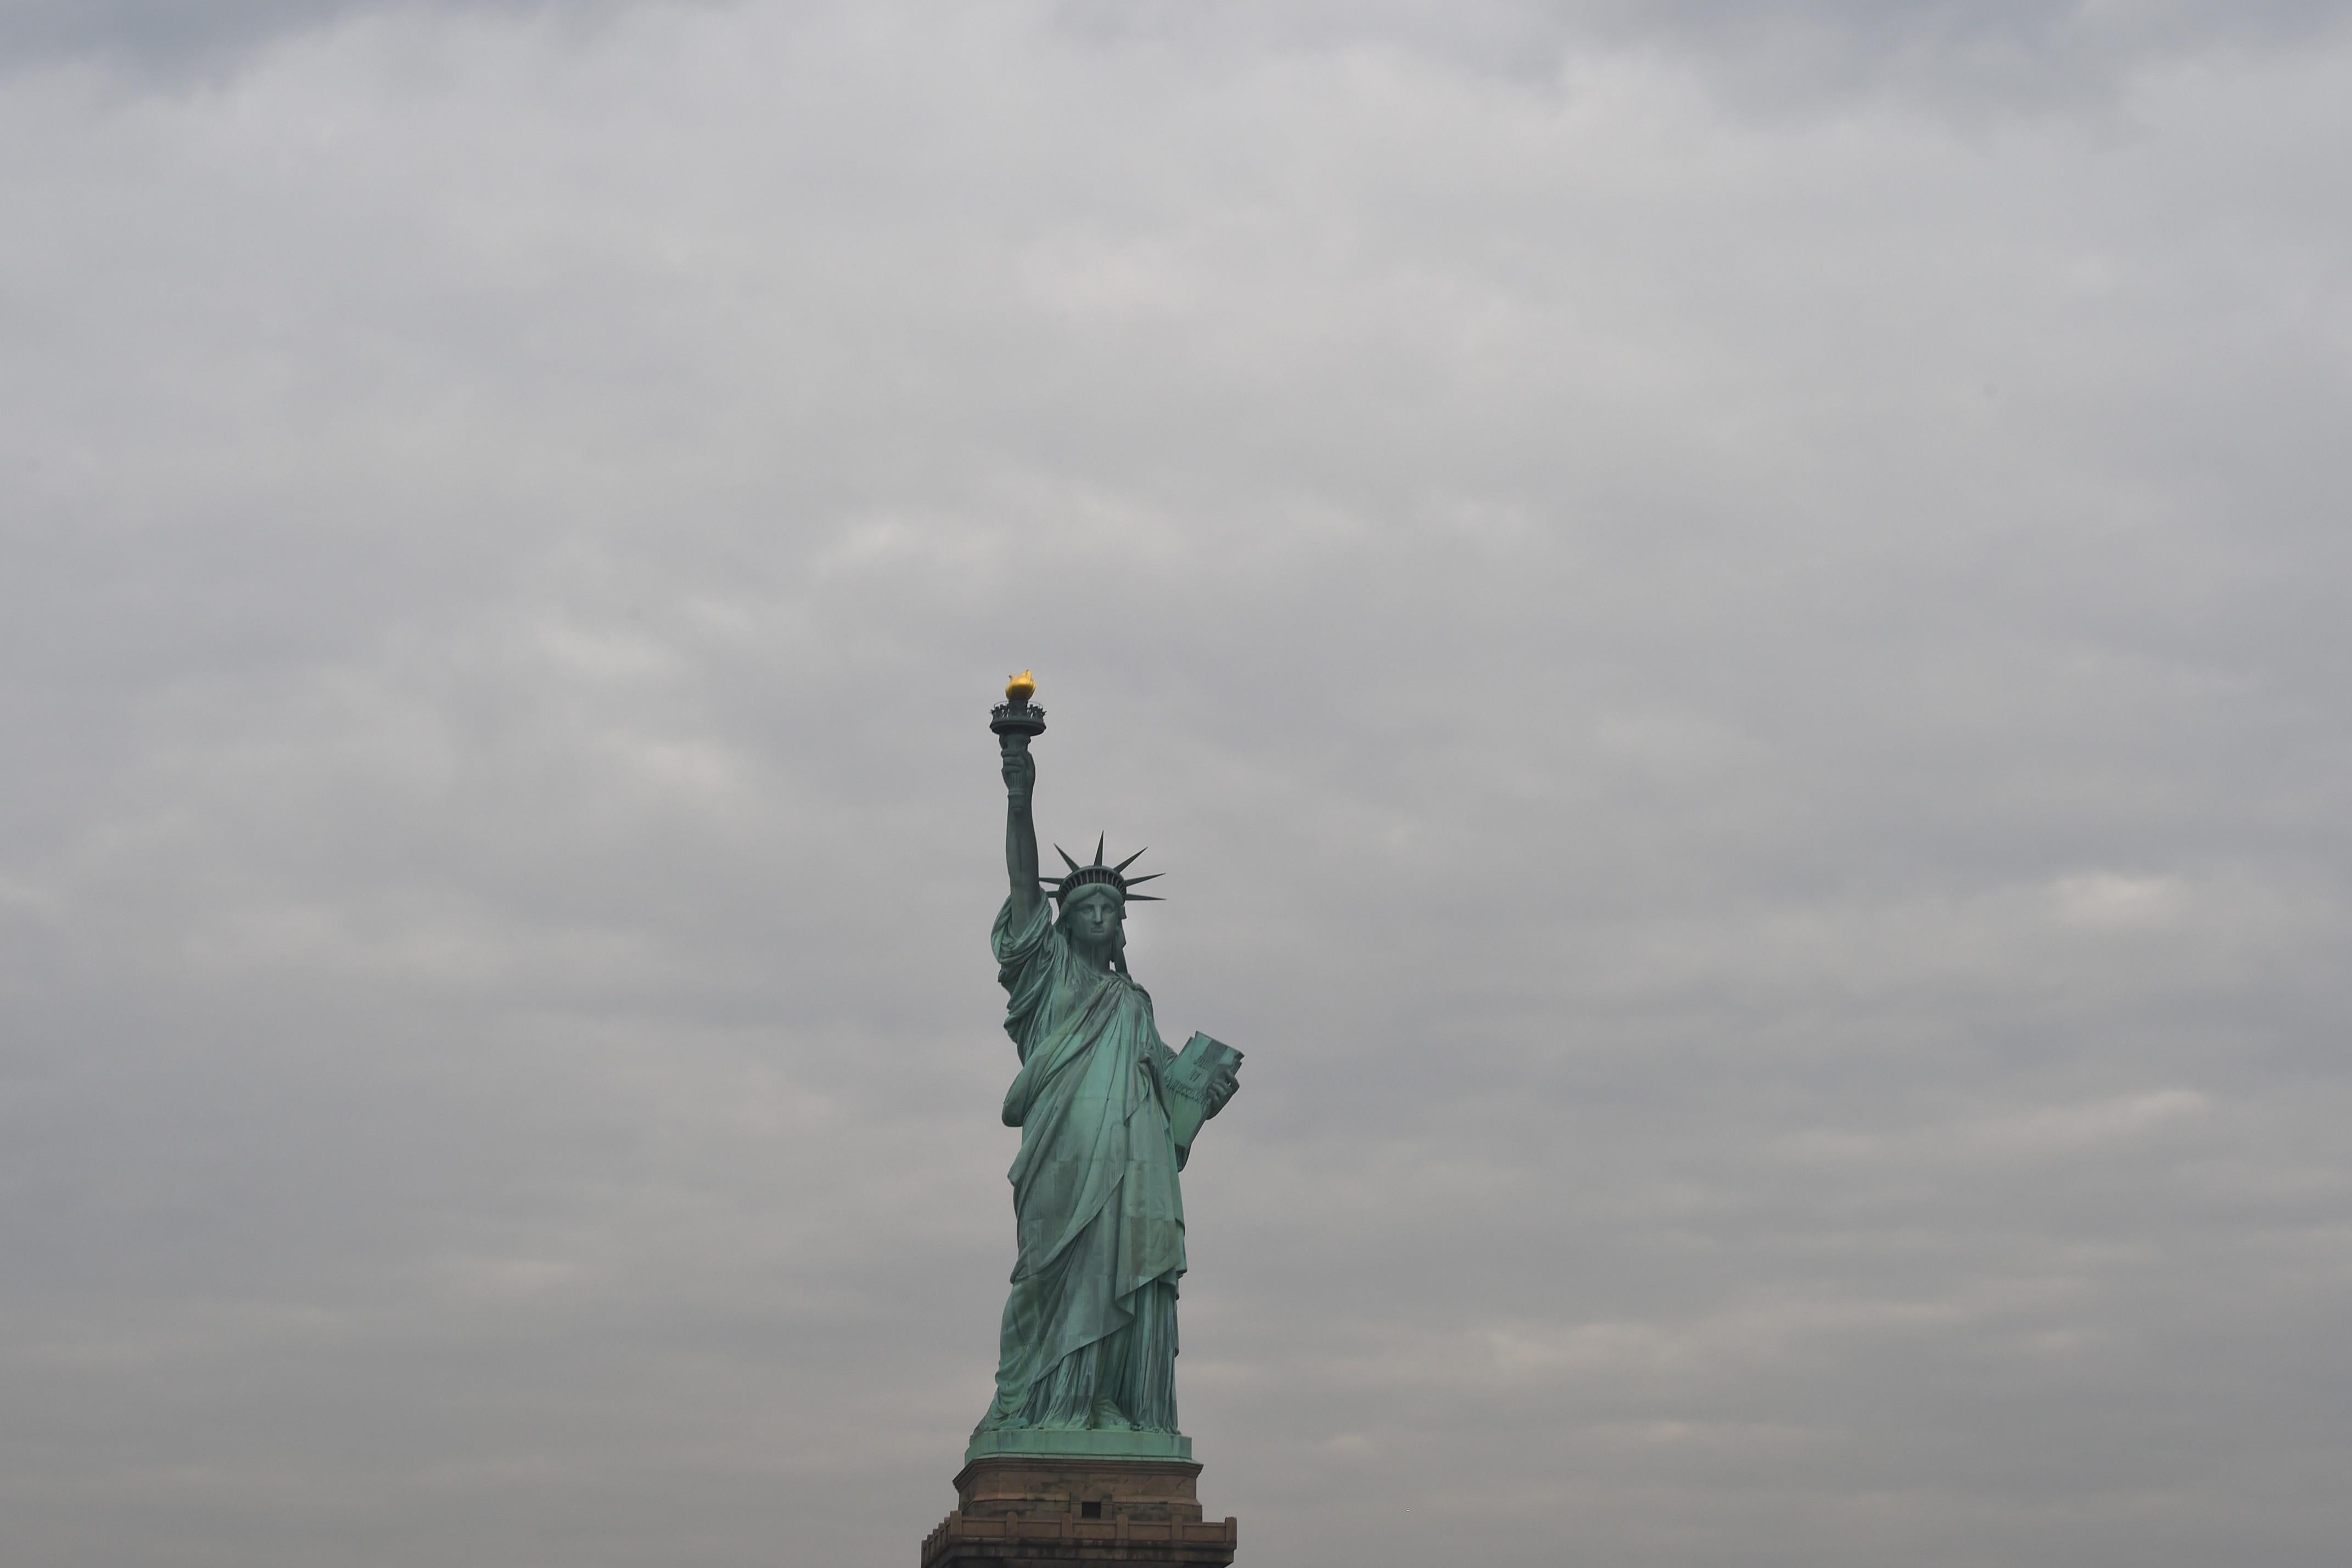 The Statue of Liberty on Jan. 22 in New York.